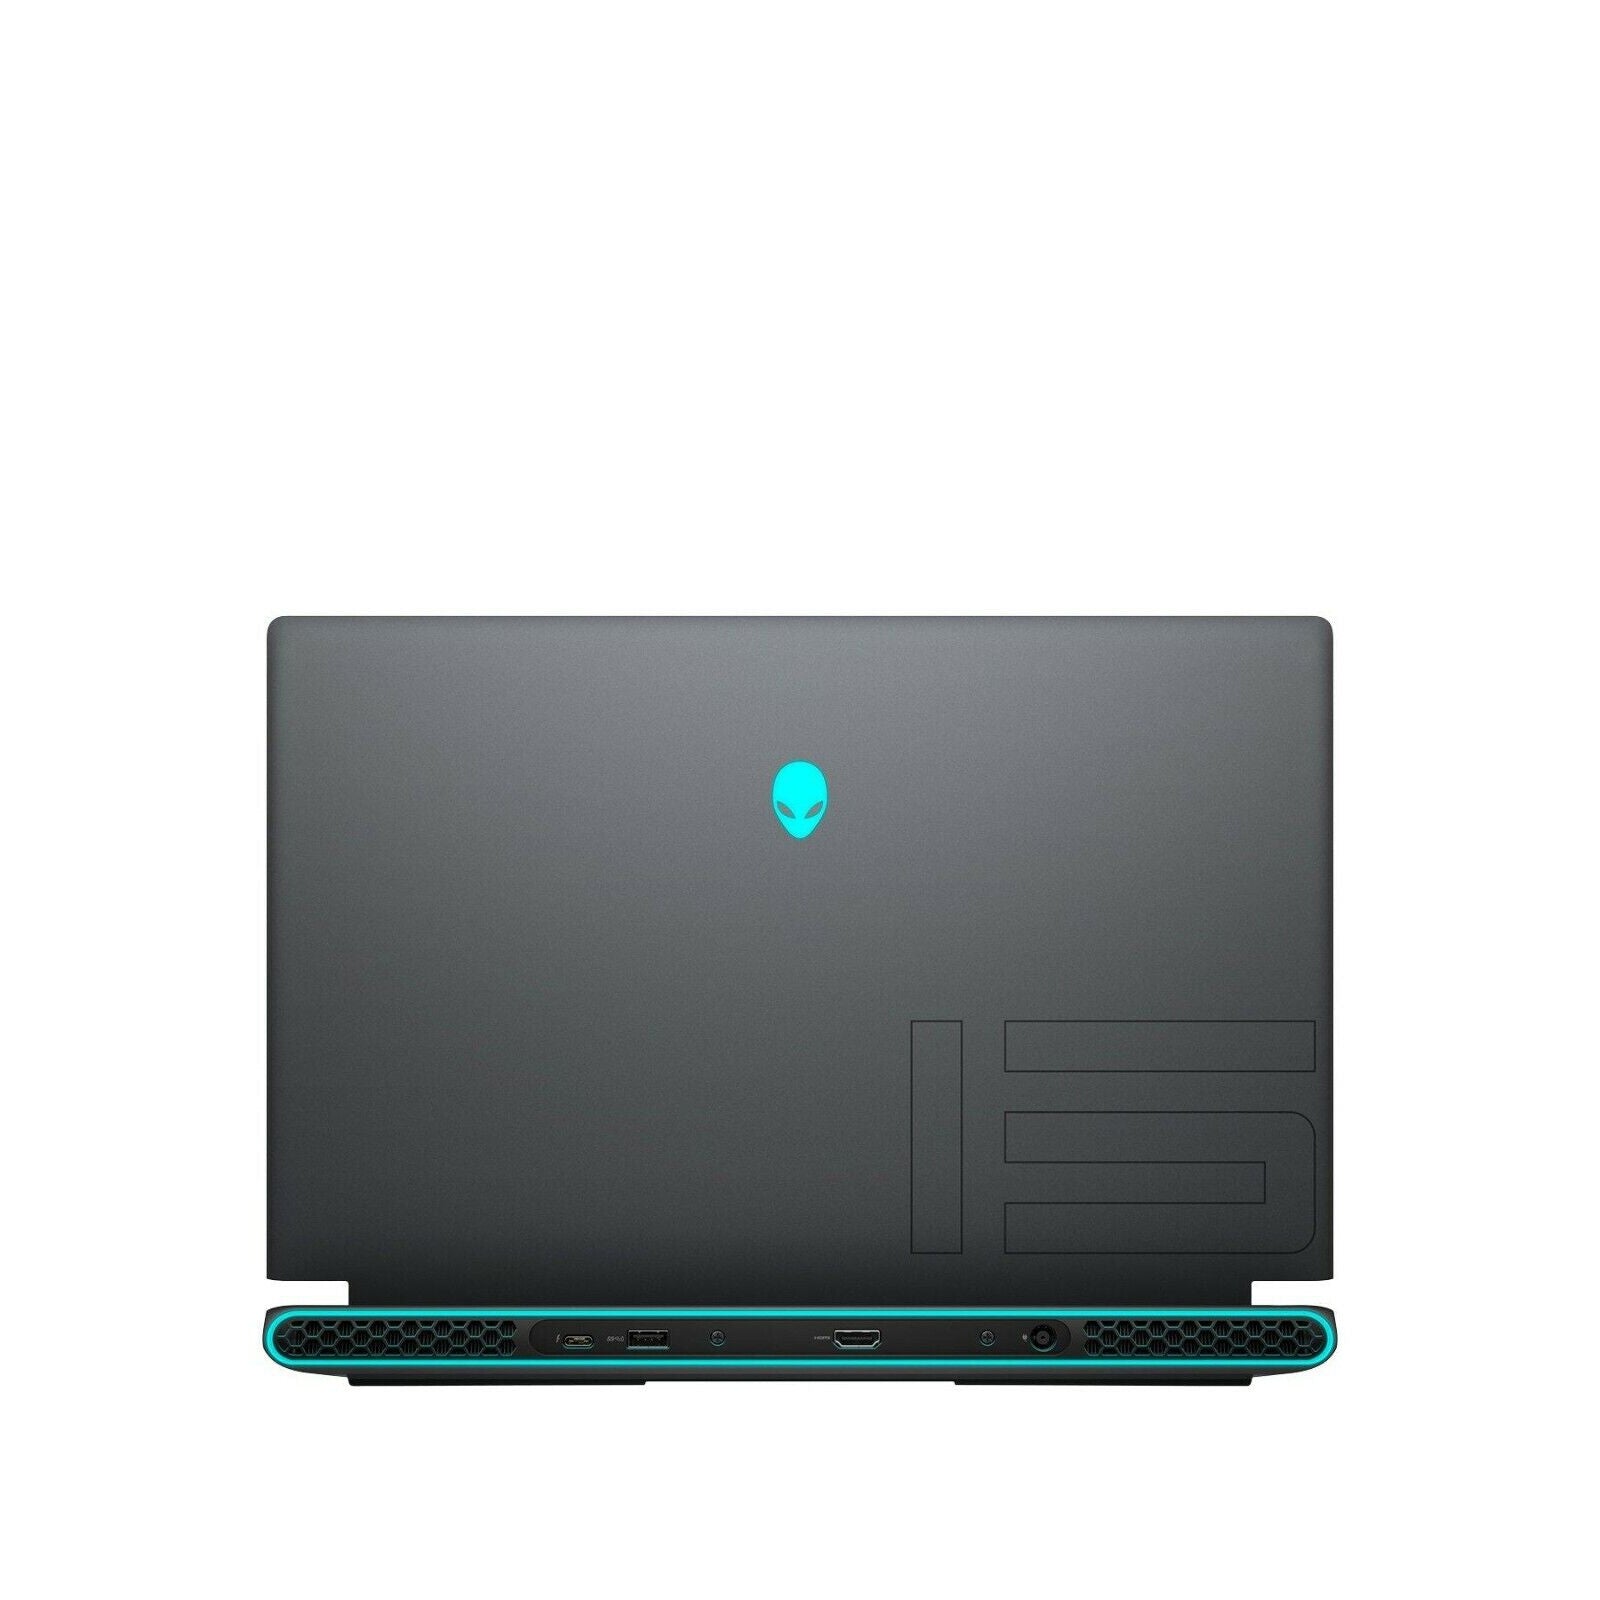 Alienware M15 R6 15.6" Gaming Laptop - IntelCore i7, 512GB SSD, 16GB RAM - Dark Side of the Moon